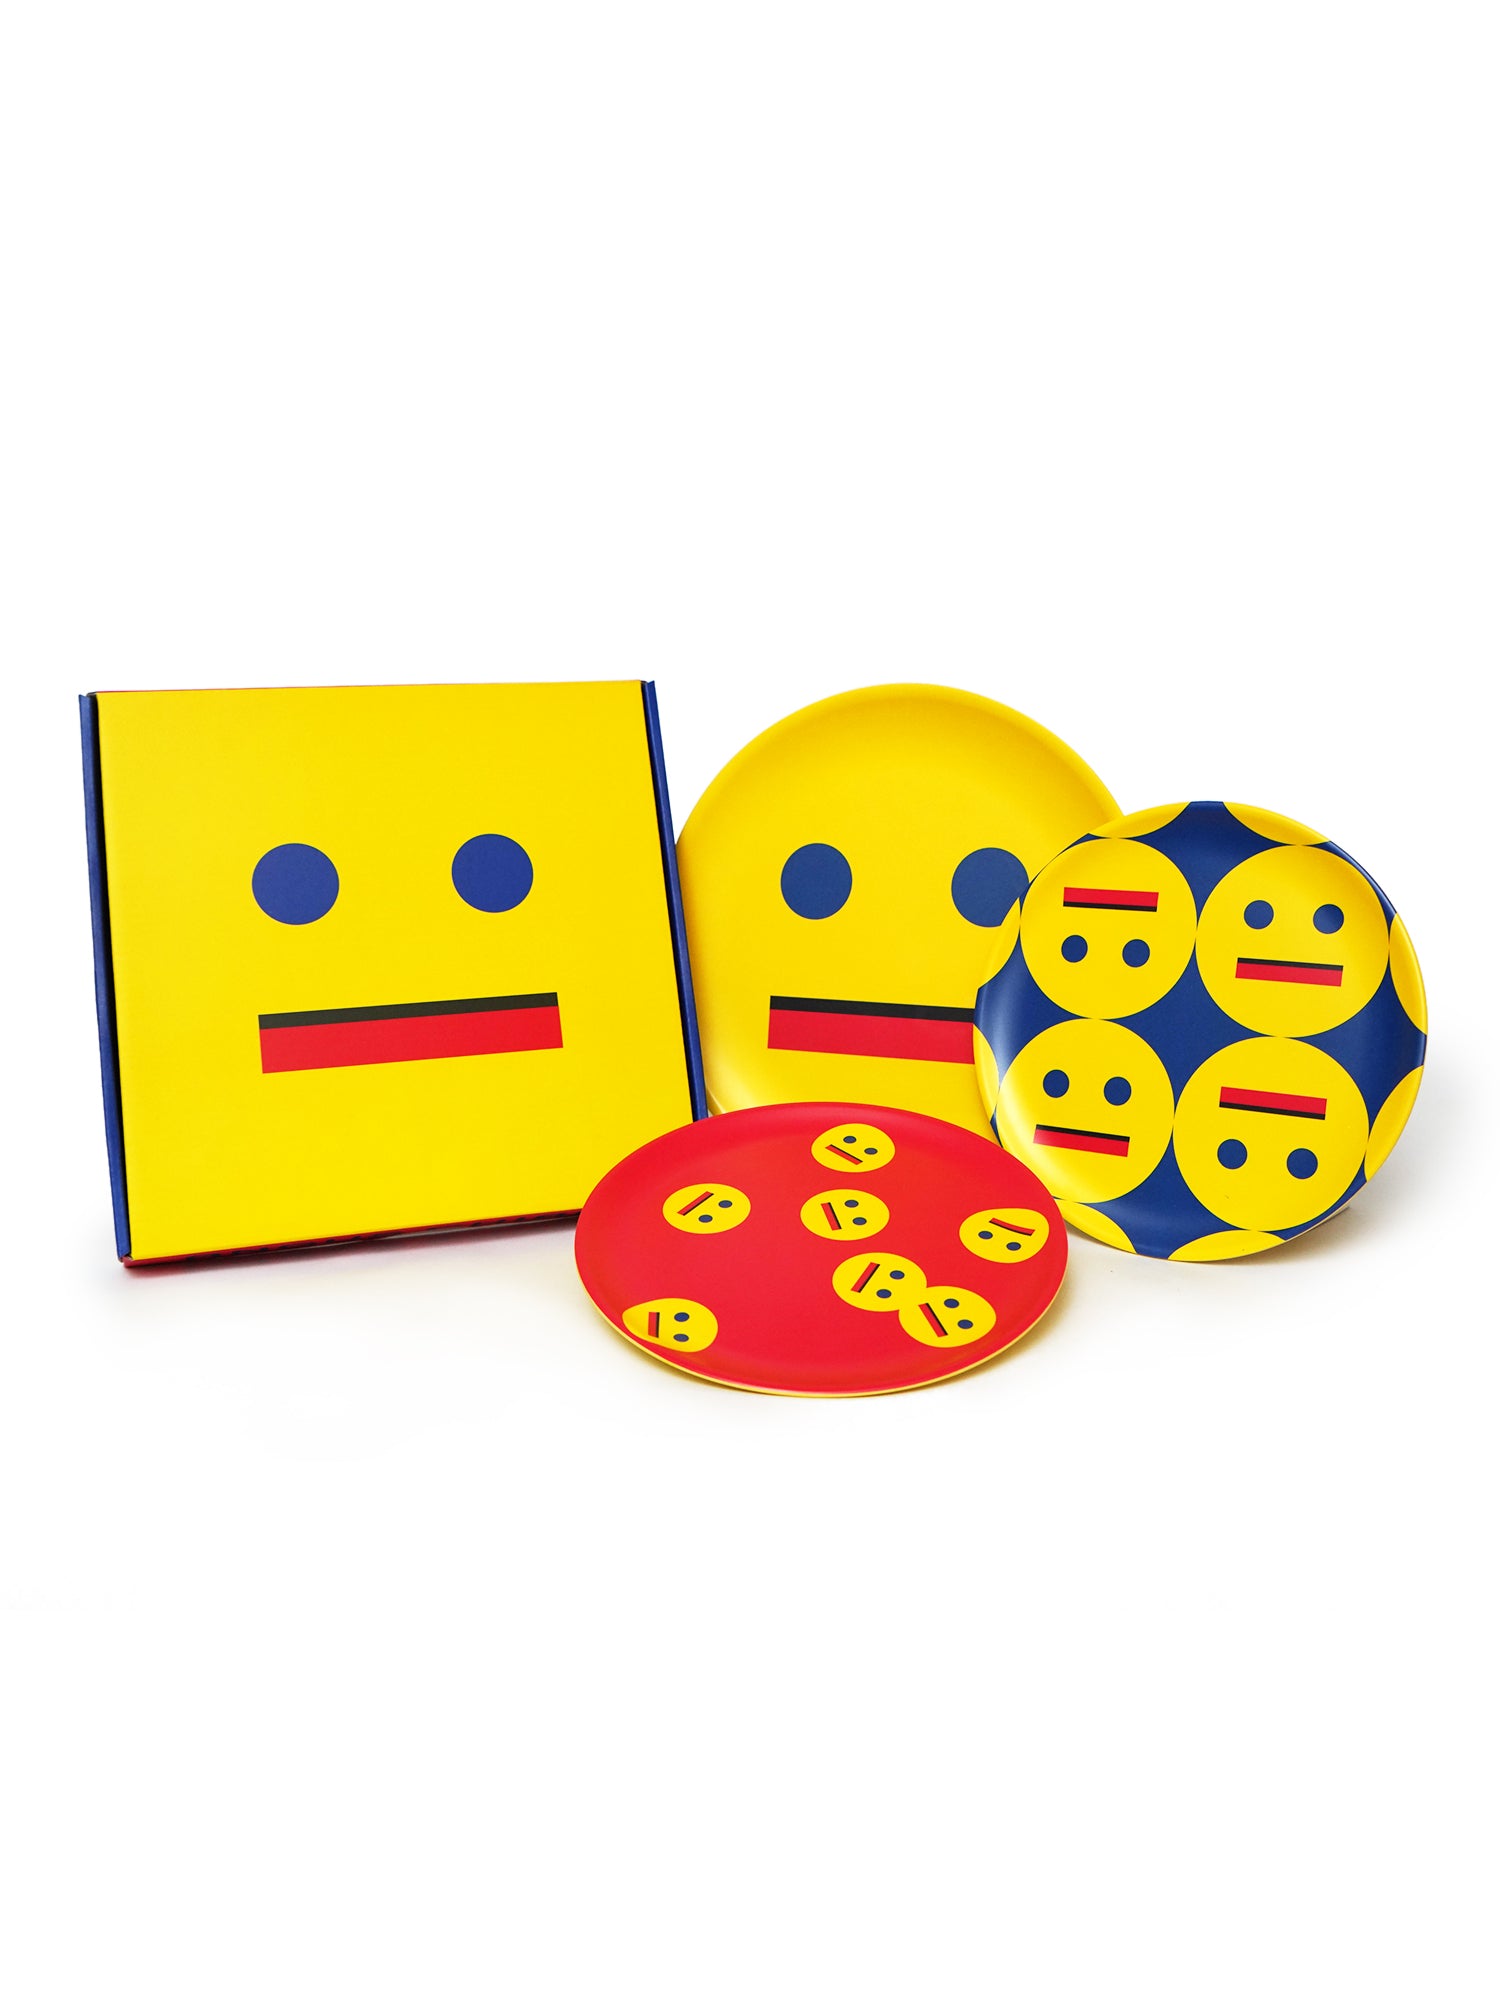 [SMILEY by ANGUS CHIANG] BAMBOO FIBER PLATE SET